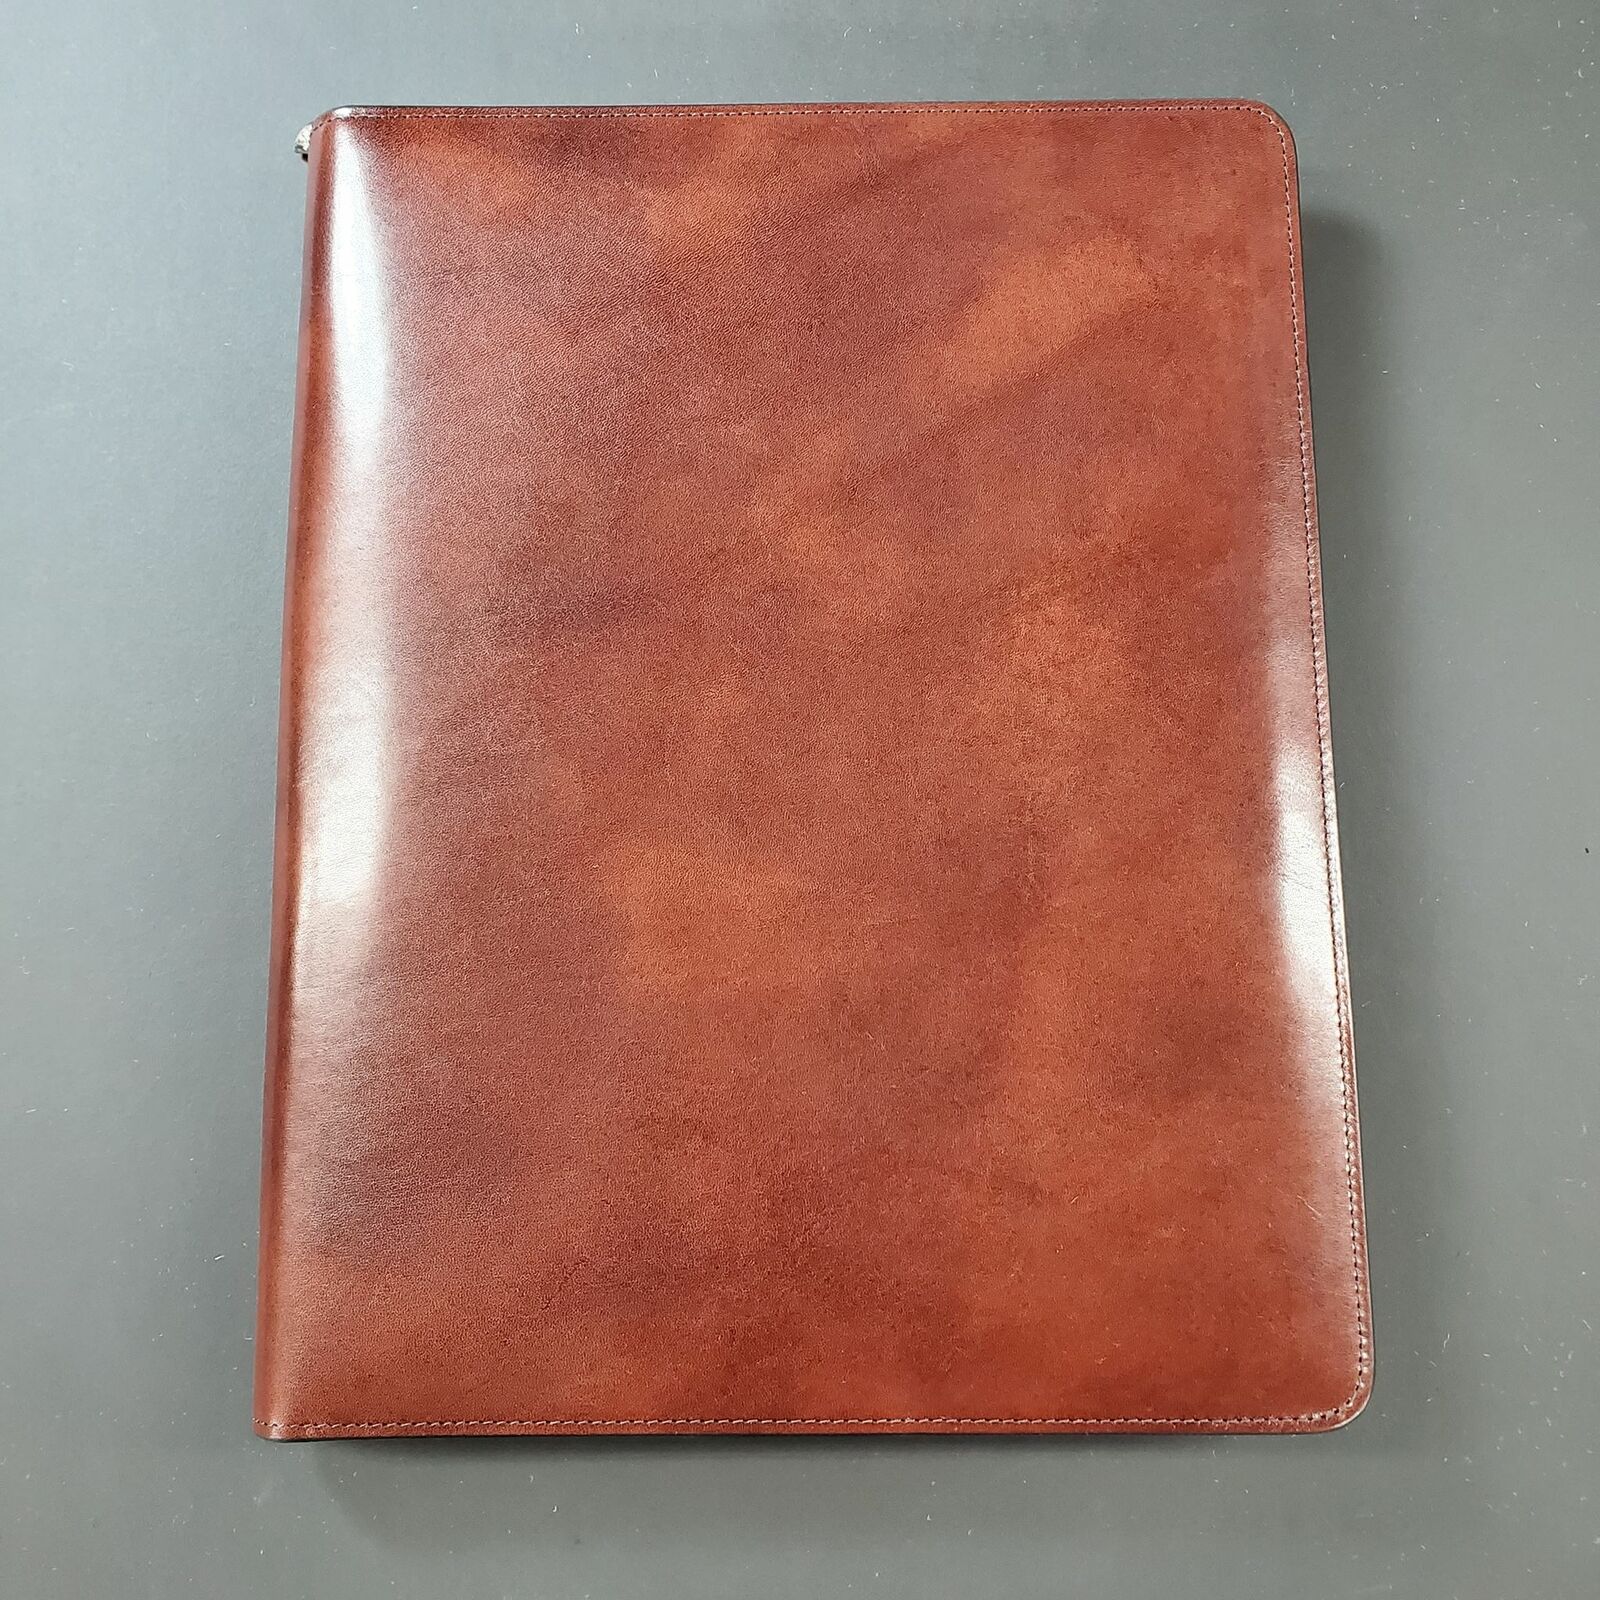 New Bosca Old Leather Brown Zipper Padfolio #932 58